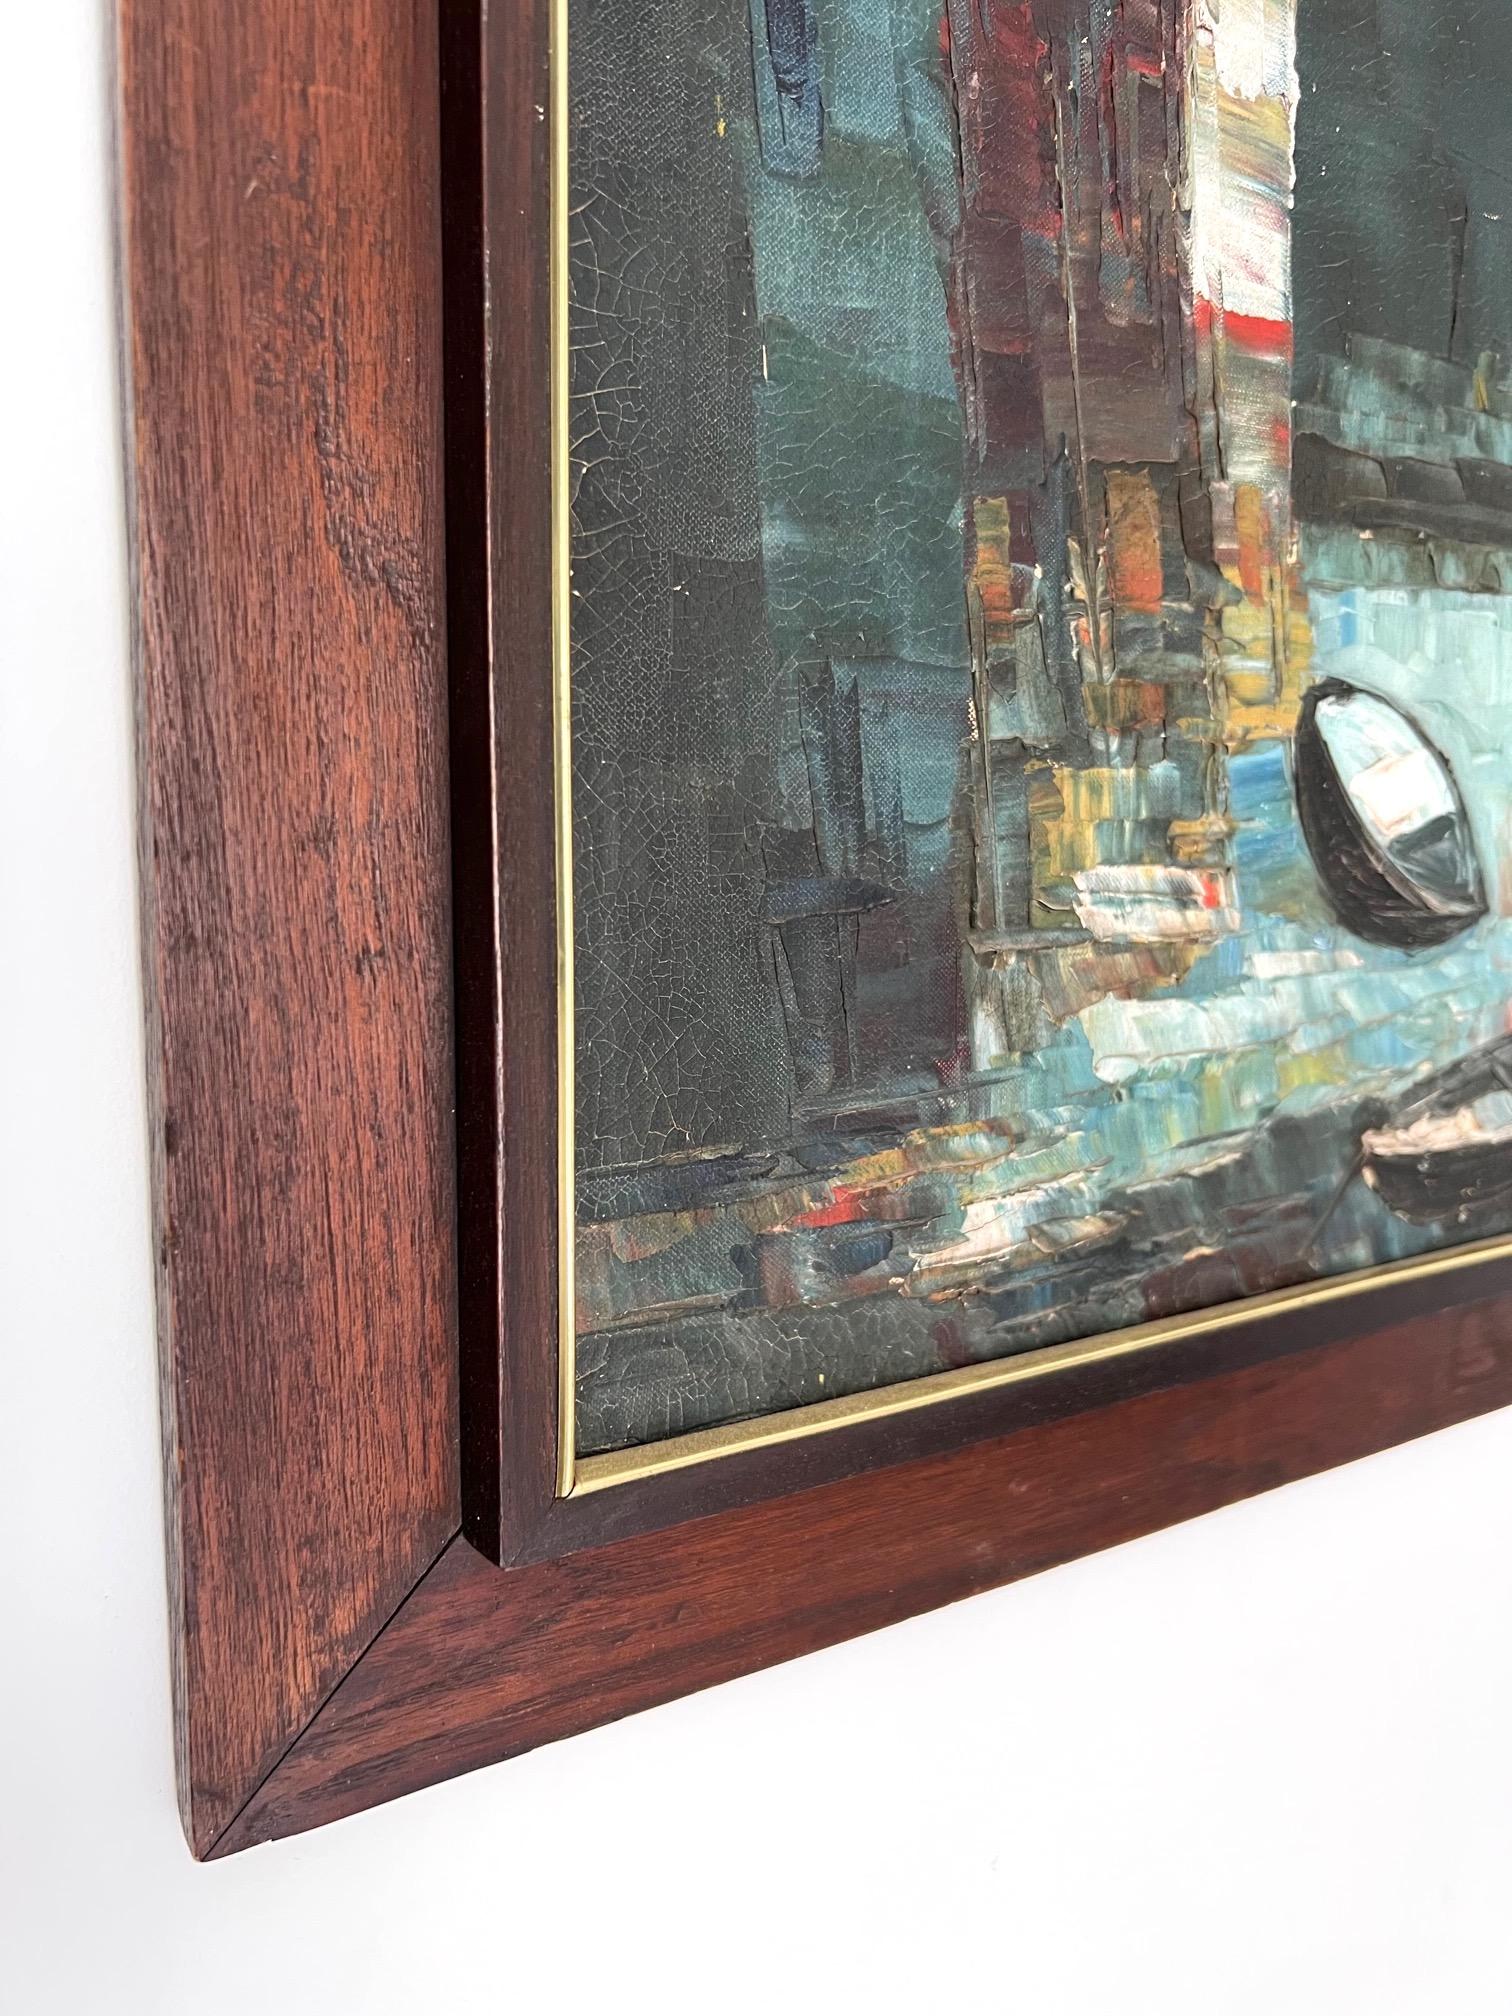 American Abstract Painting in Original Wood Frame, Rowboats Oil on Board, c. 1950s For Sale